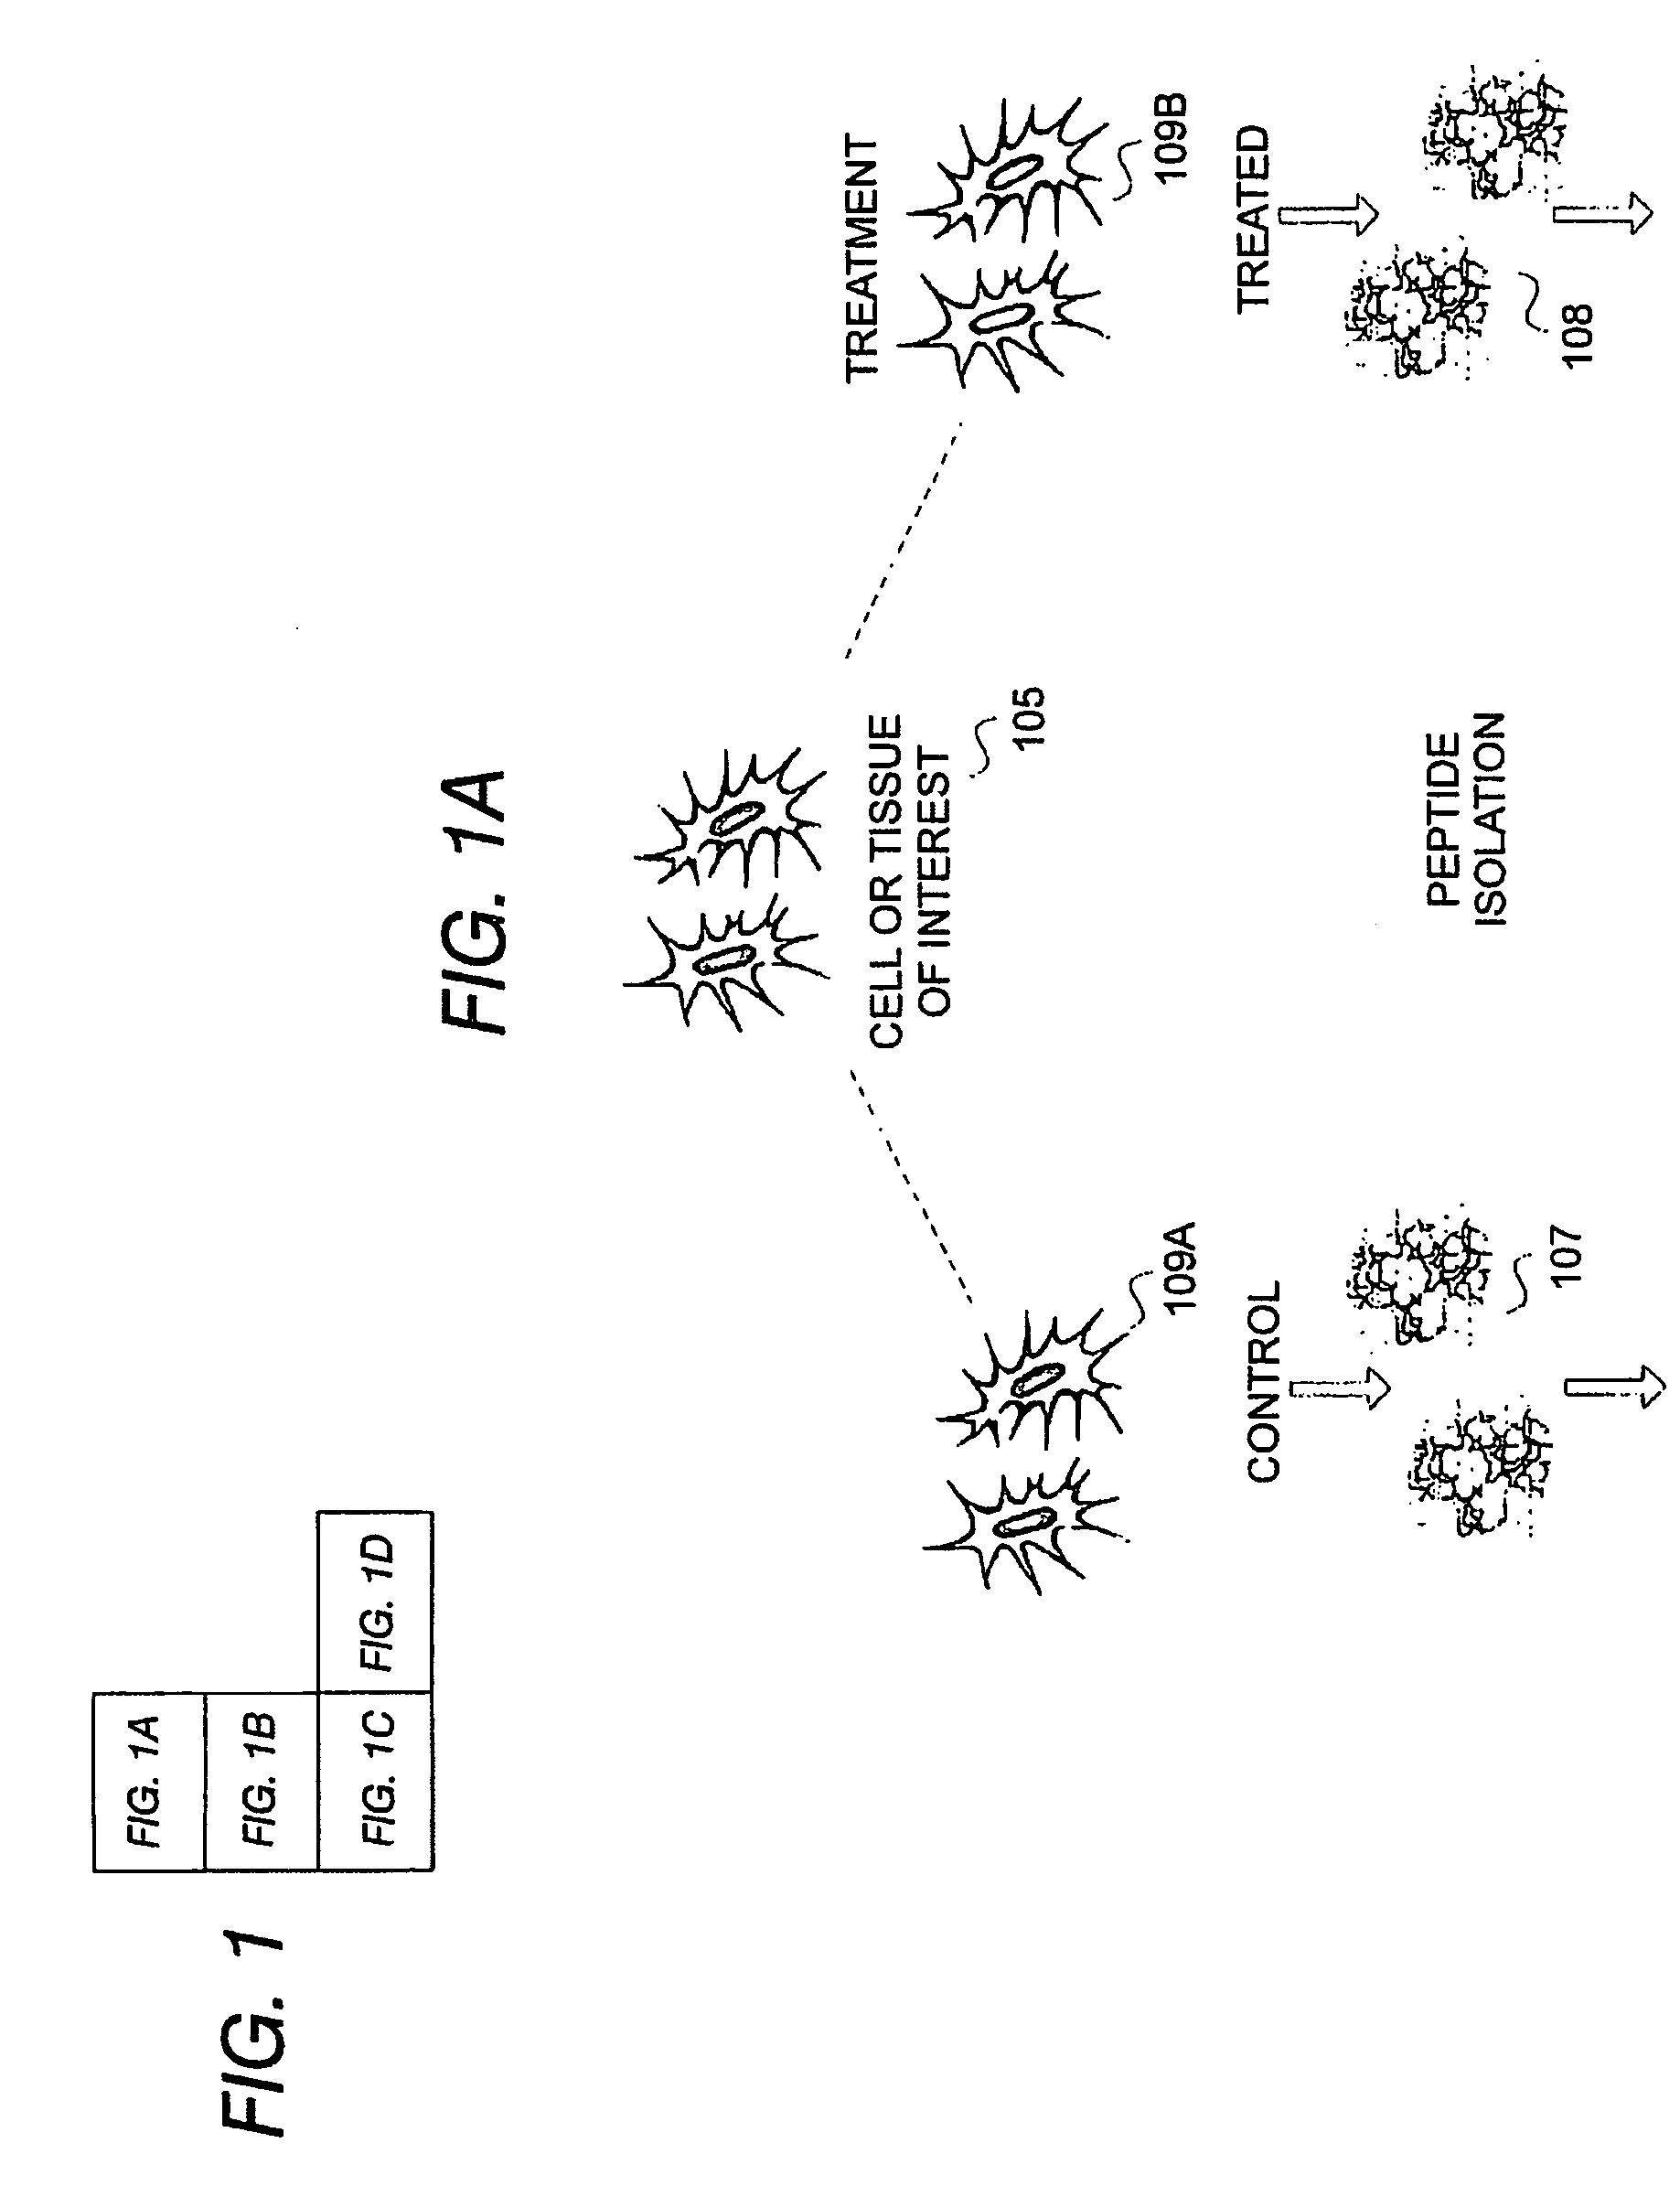 System and method of determining proteomic differences